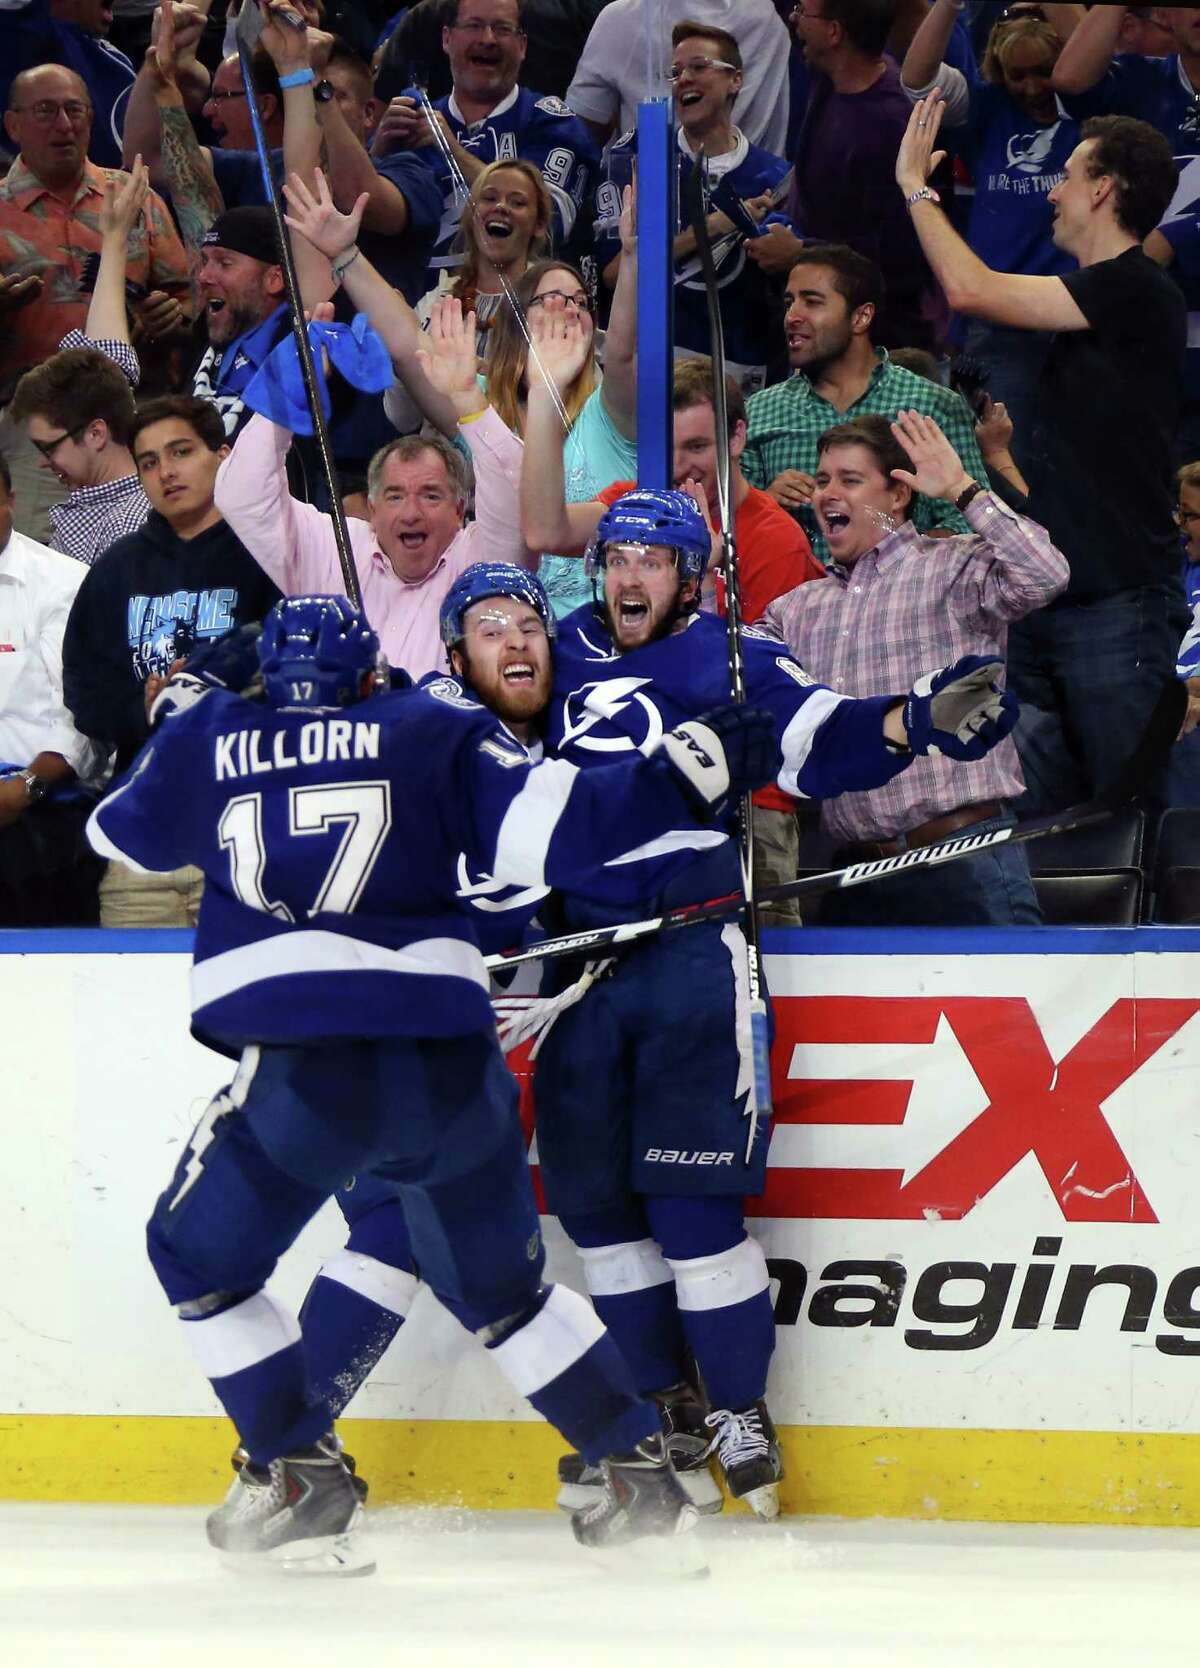 TAMPA, FL - MAY 20: Nikita Kucherov #86 of the Tampa Bay Lightning celebrates with his teammates after scoring the game winning goal in overtime to defeat the New York Rangers 6 to 5 in Game Three of the Eastern Conference Finals during the 2015 NHL Stanley Cup Playoffs at Amalie Arena on May 20, 2015 in Tampa, Florida. (Photo by Bruce Bennett/Getty Images) ORG XMIT: 554342781